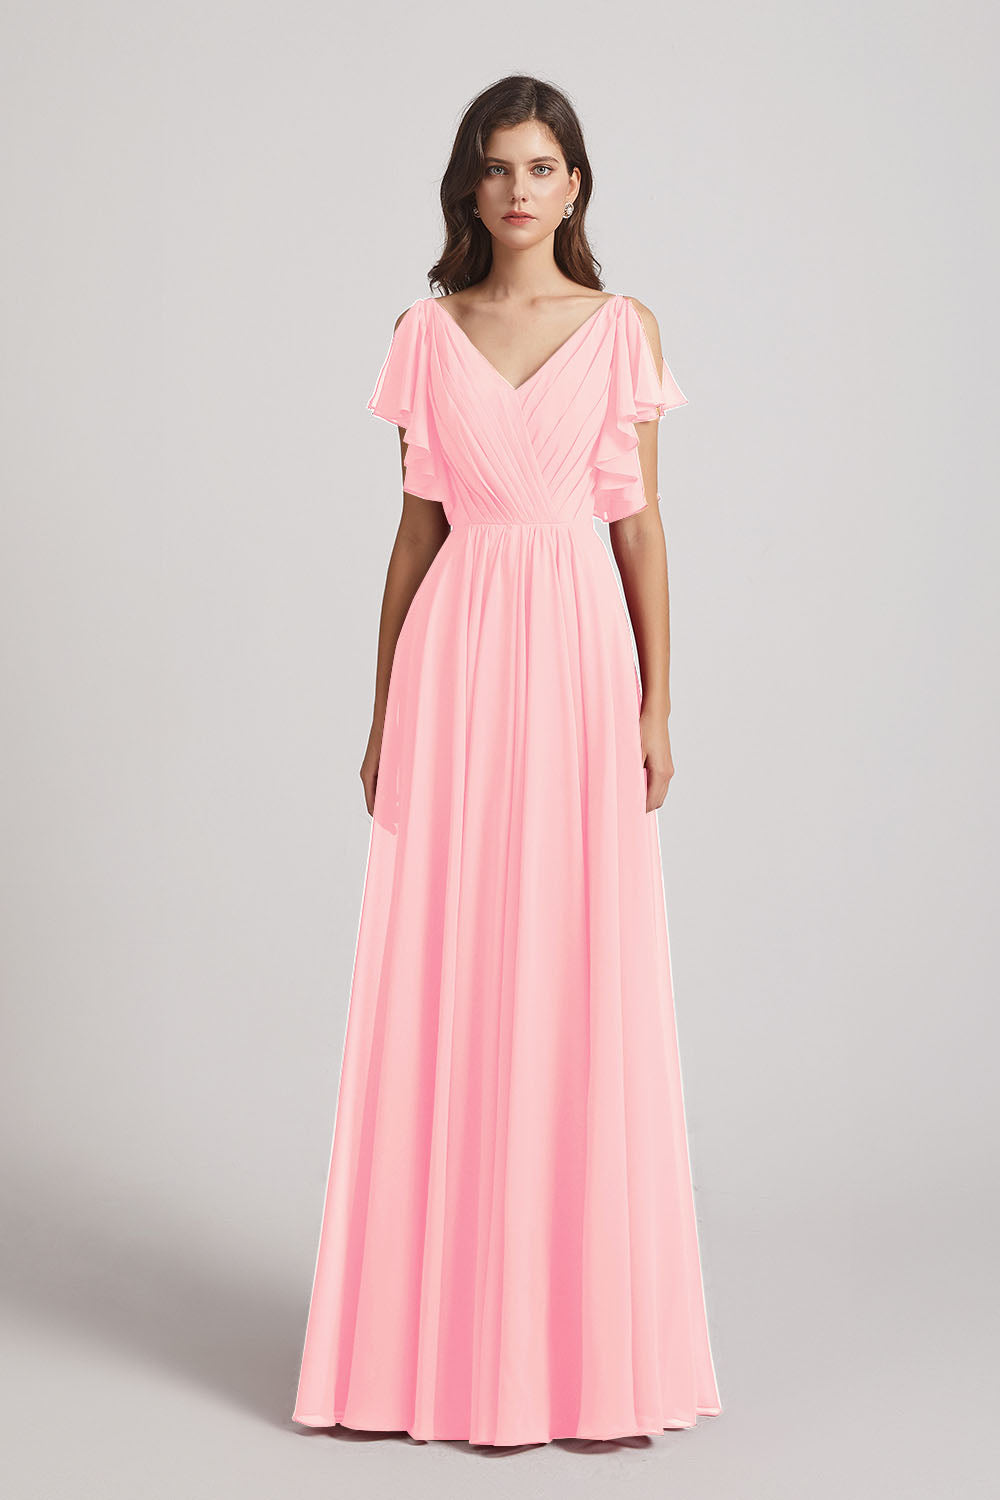 Alfa Bridal Pink V-Neck Pleated Chiffon Bridesmaid Dresses with Open Flutter Sleeves (AF0098)